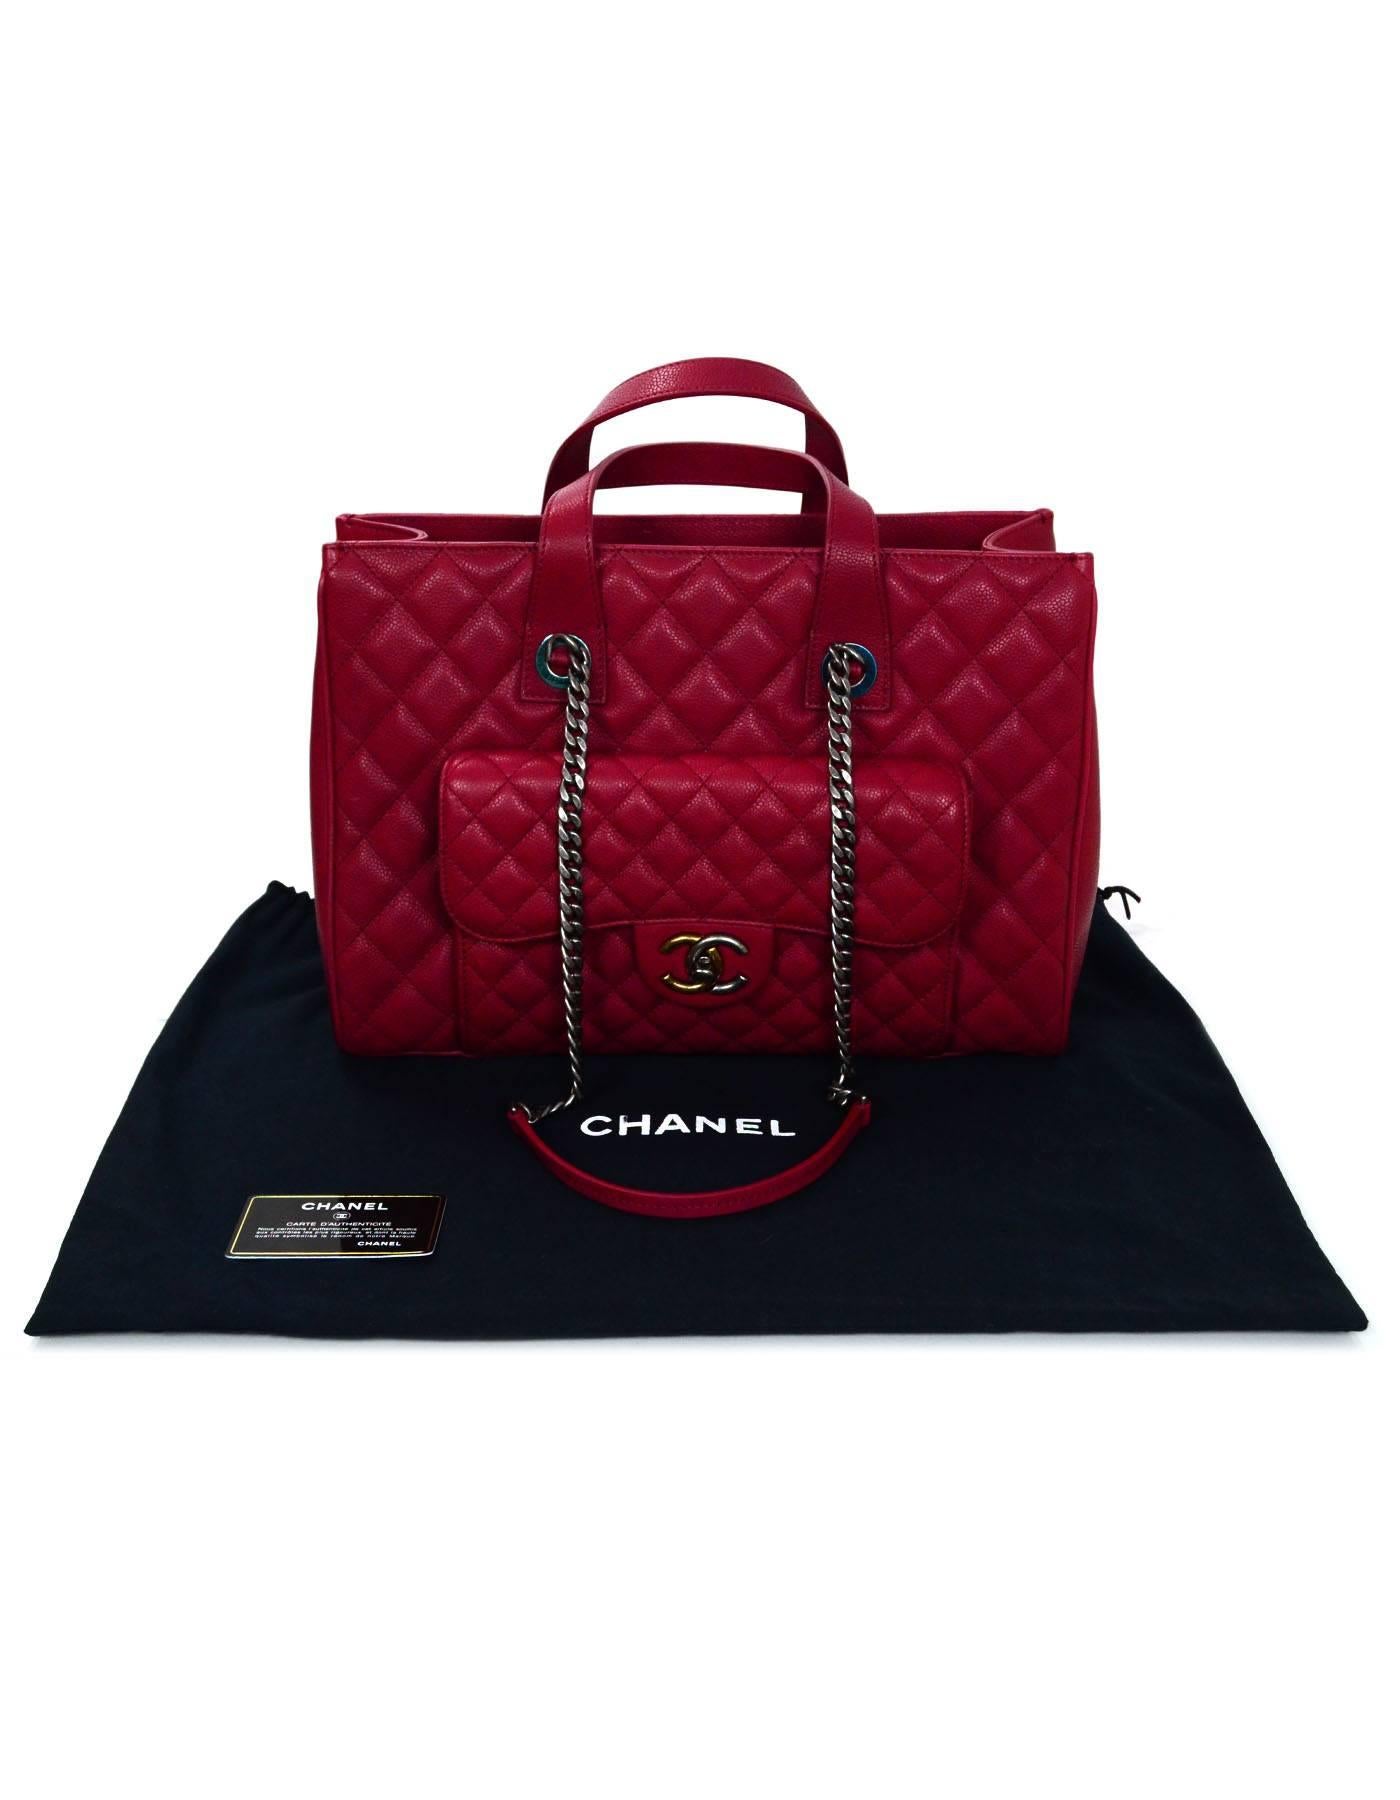 Chanel NEW 2016 Red Caviar Leather Tote Bag with Front Pocket 2